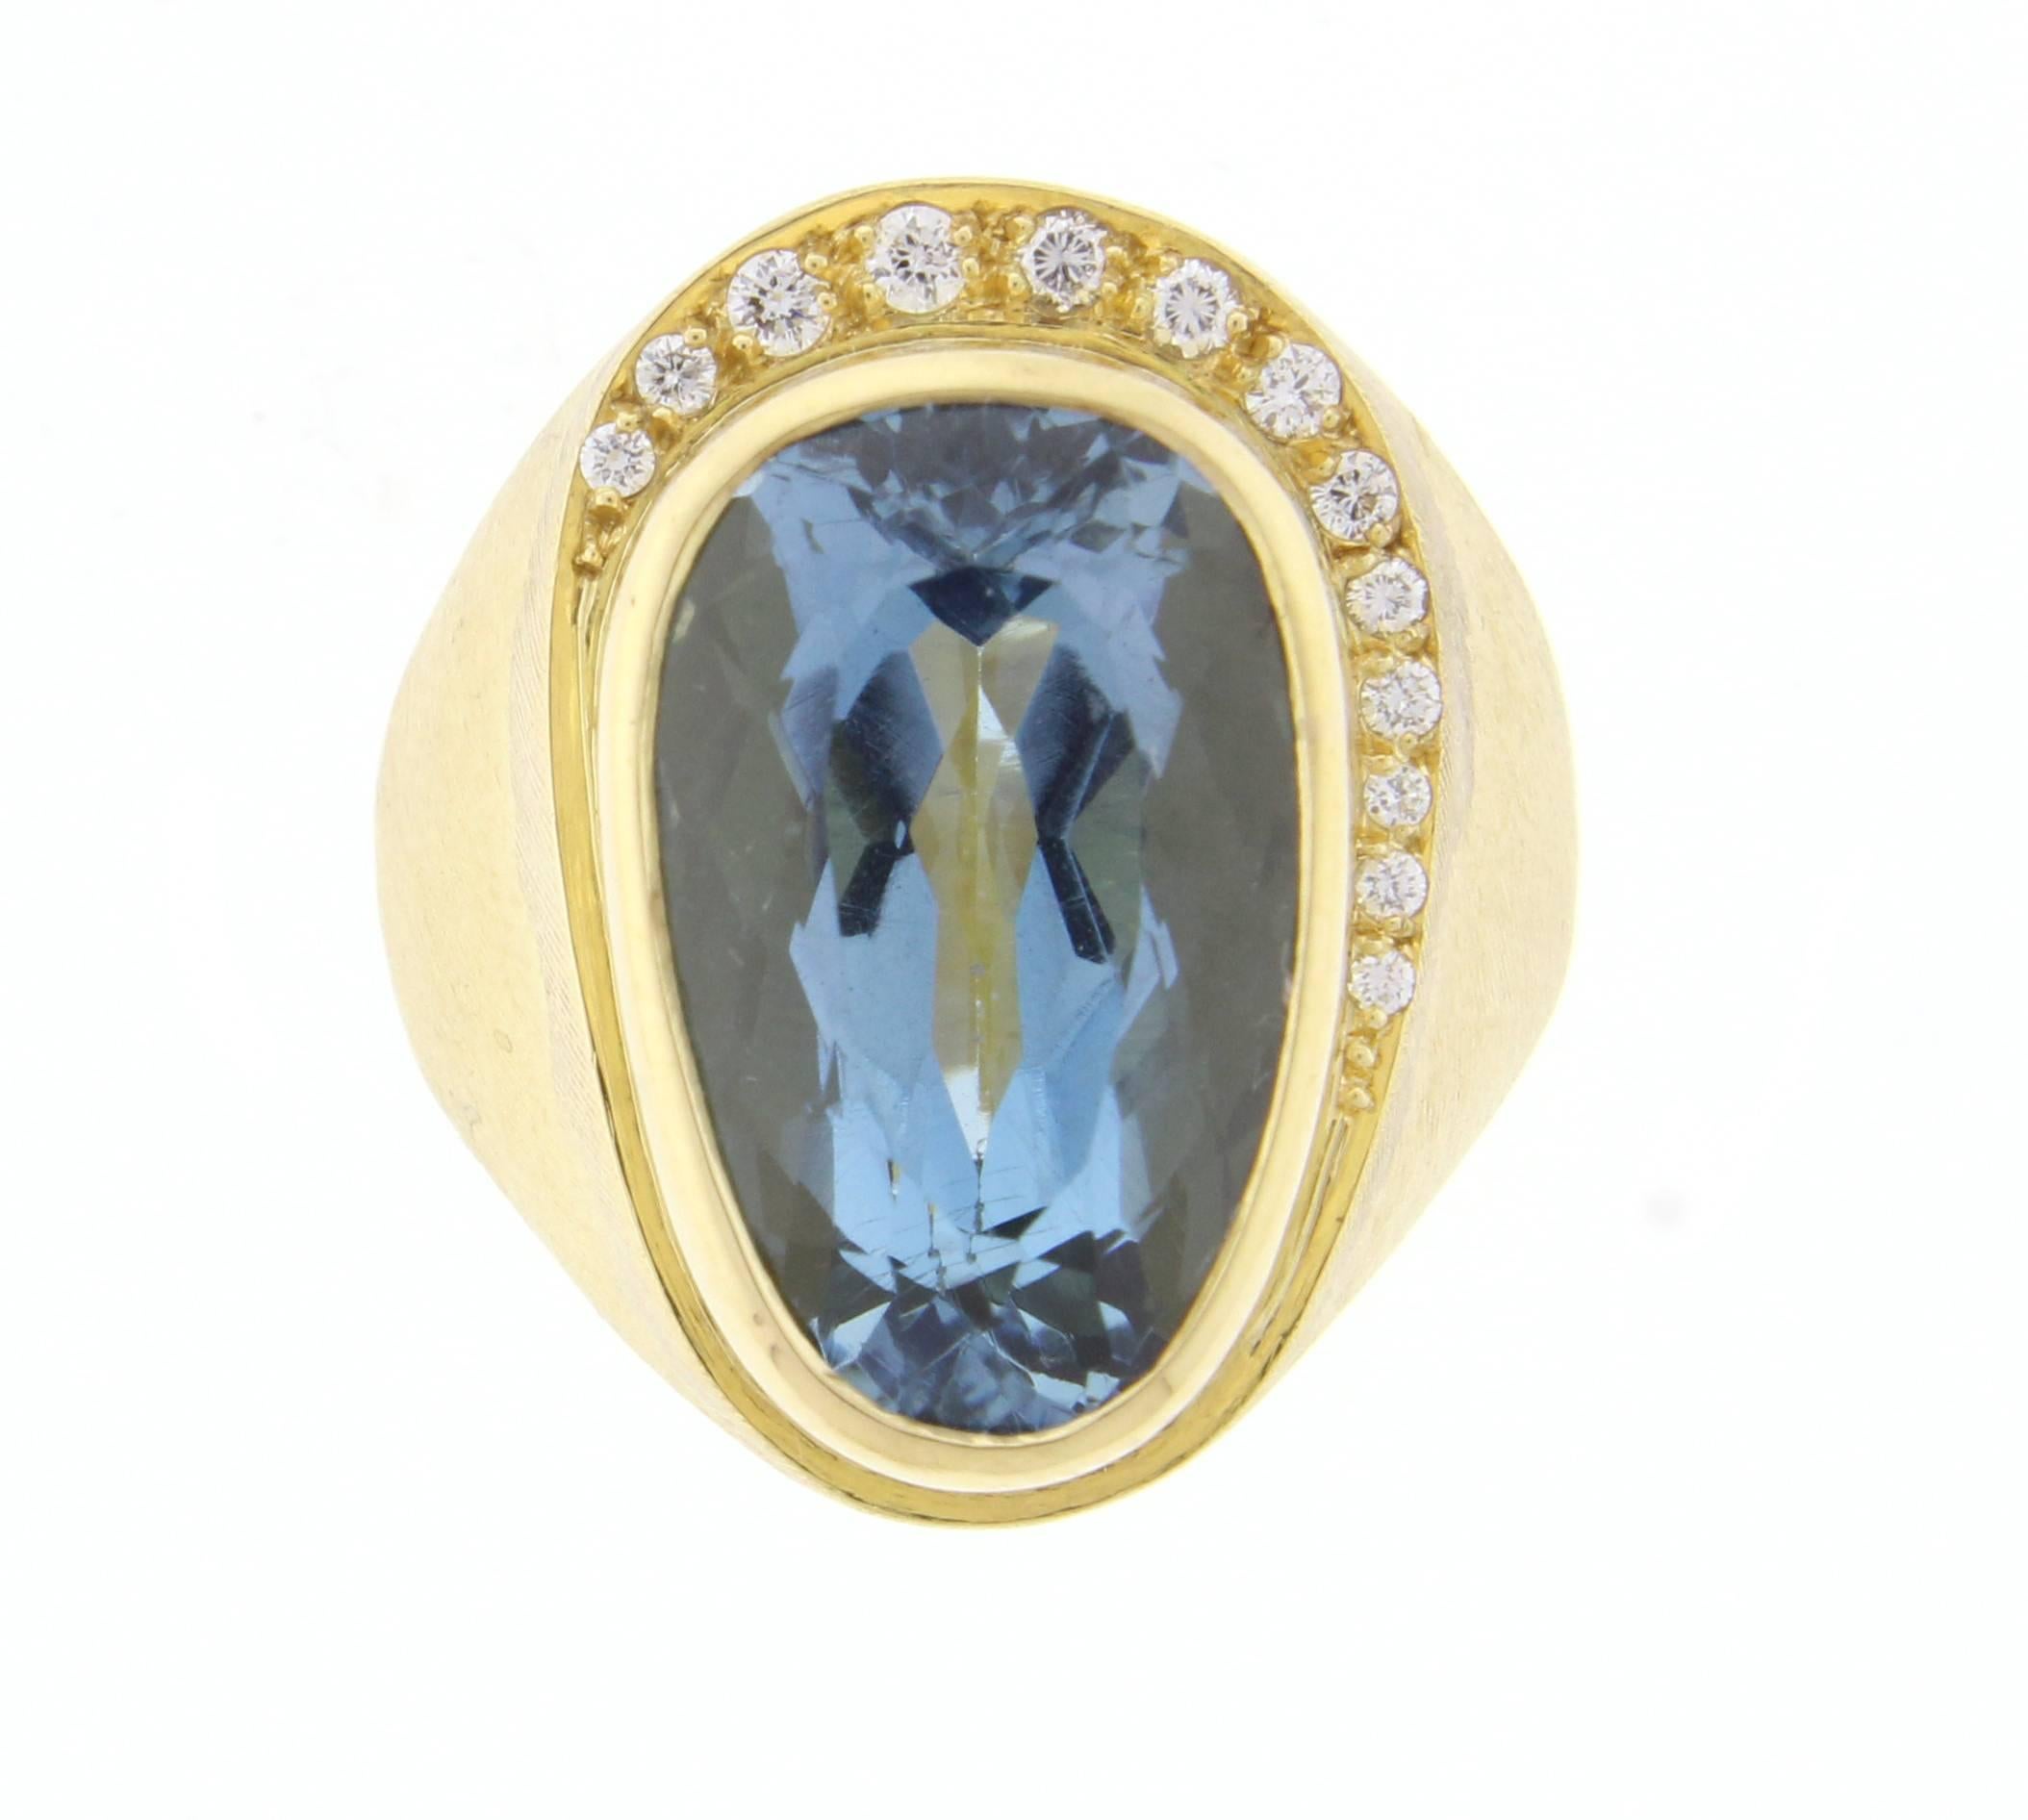 Blue topaz and diamond ring by world renowned Brazilian jeweler Haroldo Burle Marx (1911-1991). The ring features a bezel 17*11mm free form blue toaz and 13 diamonds weighing approximately .20 carats set in a brushed 18 karat gold setting. Size 6